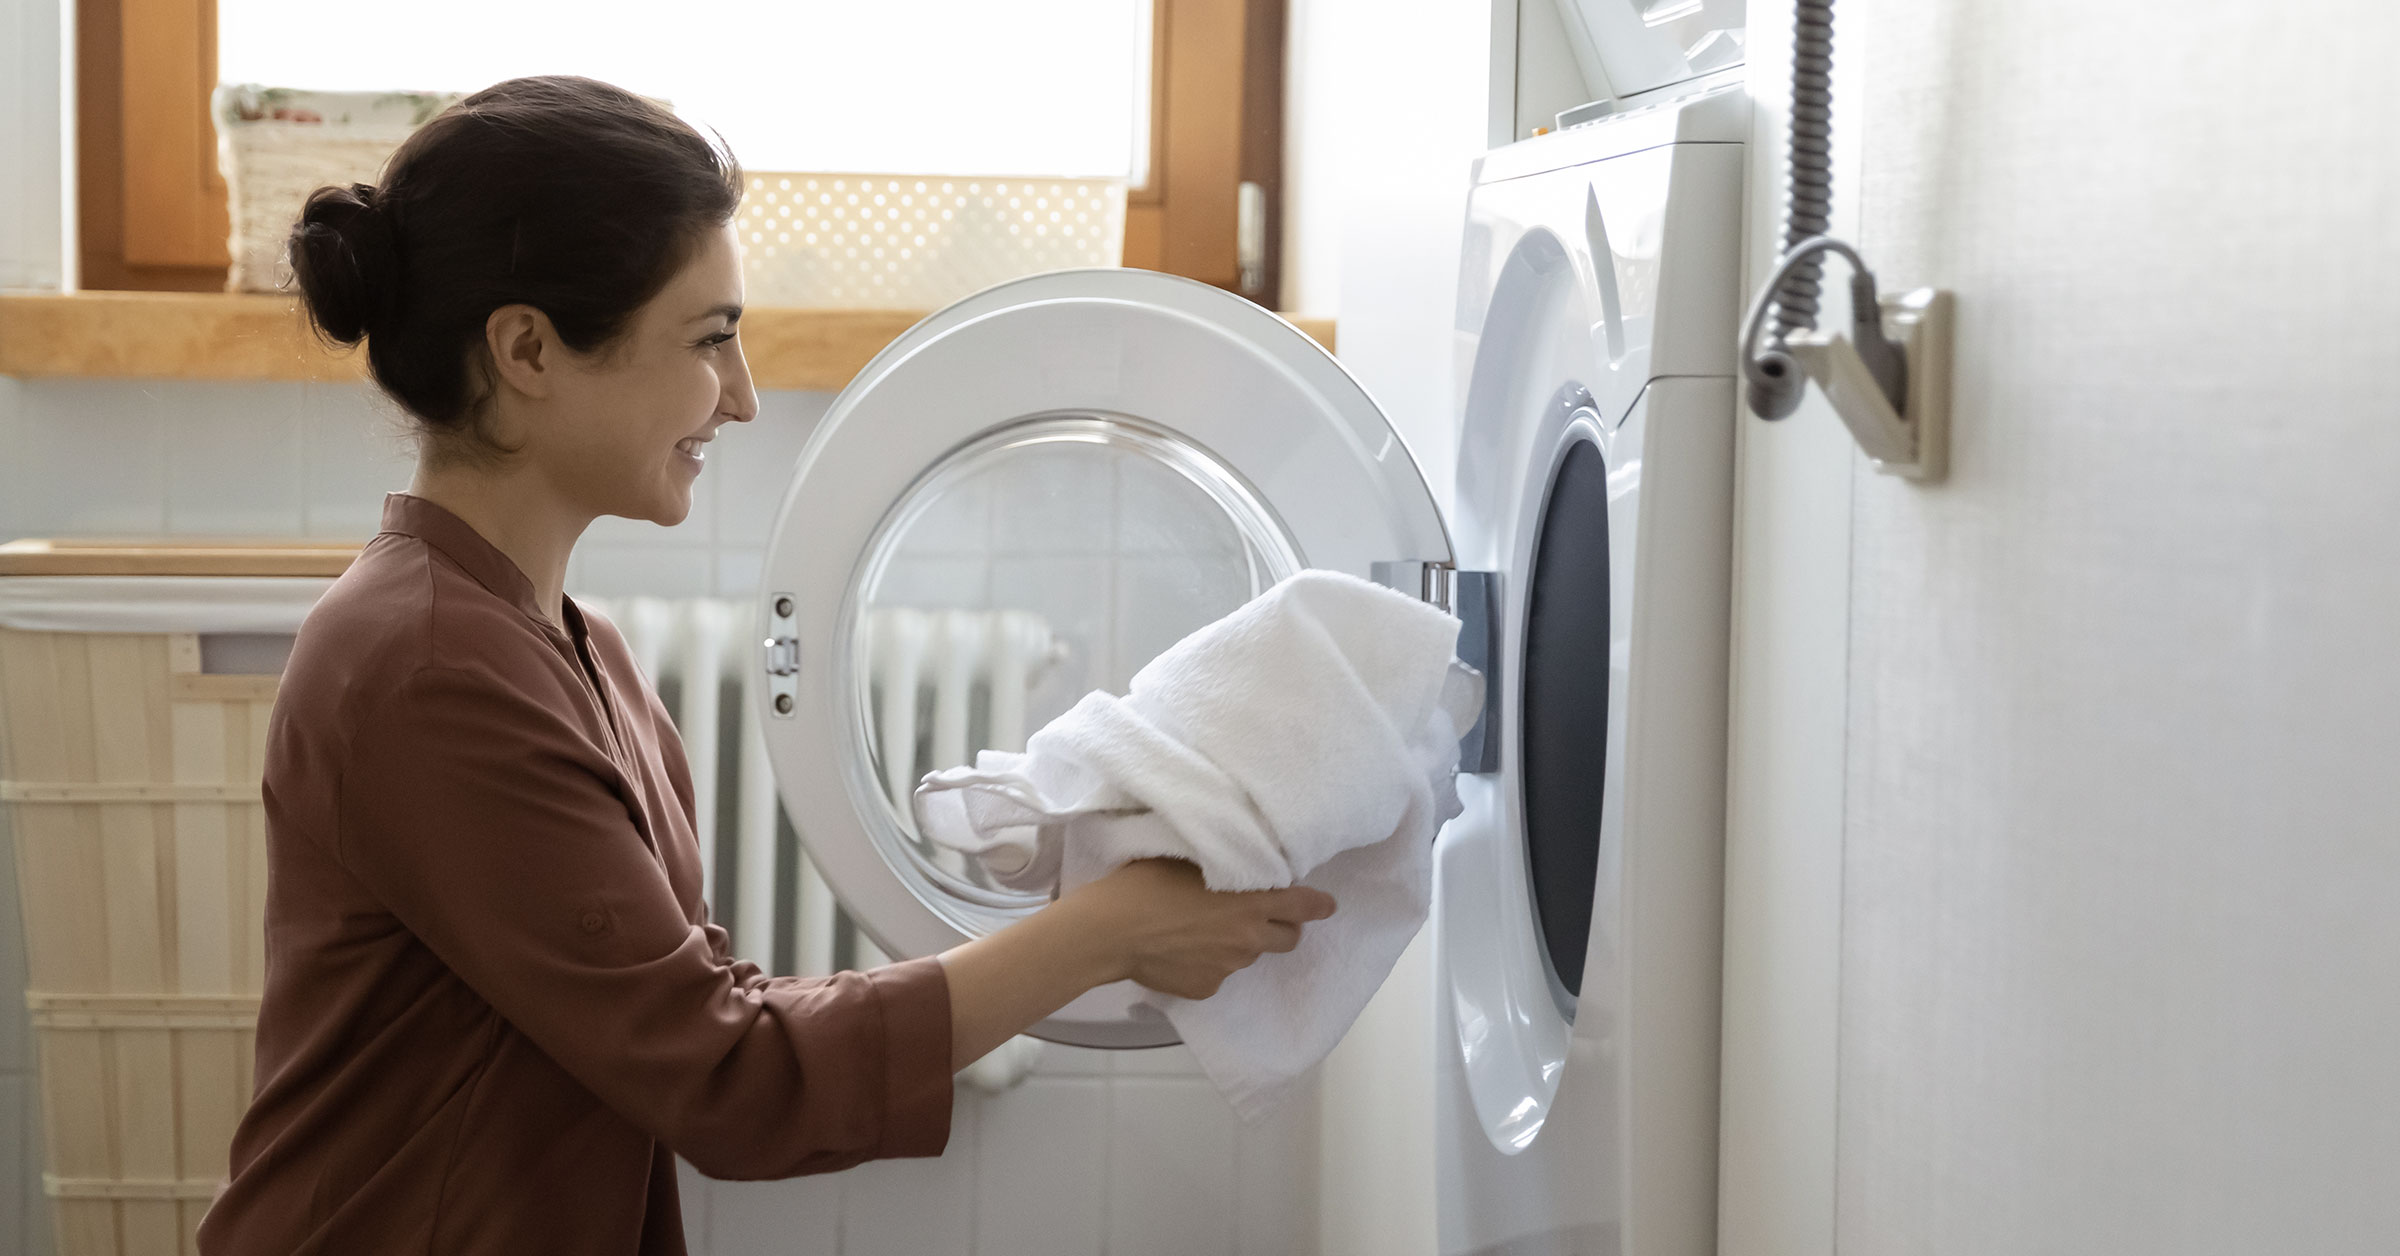 A lady smiling while placing dirty towels in a washing machine.